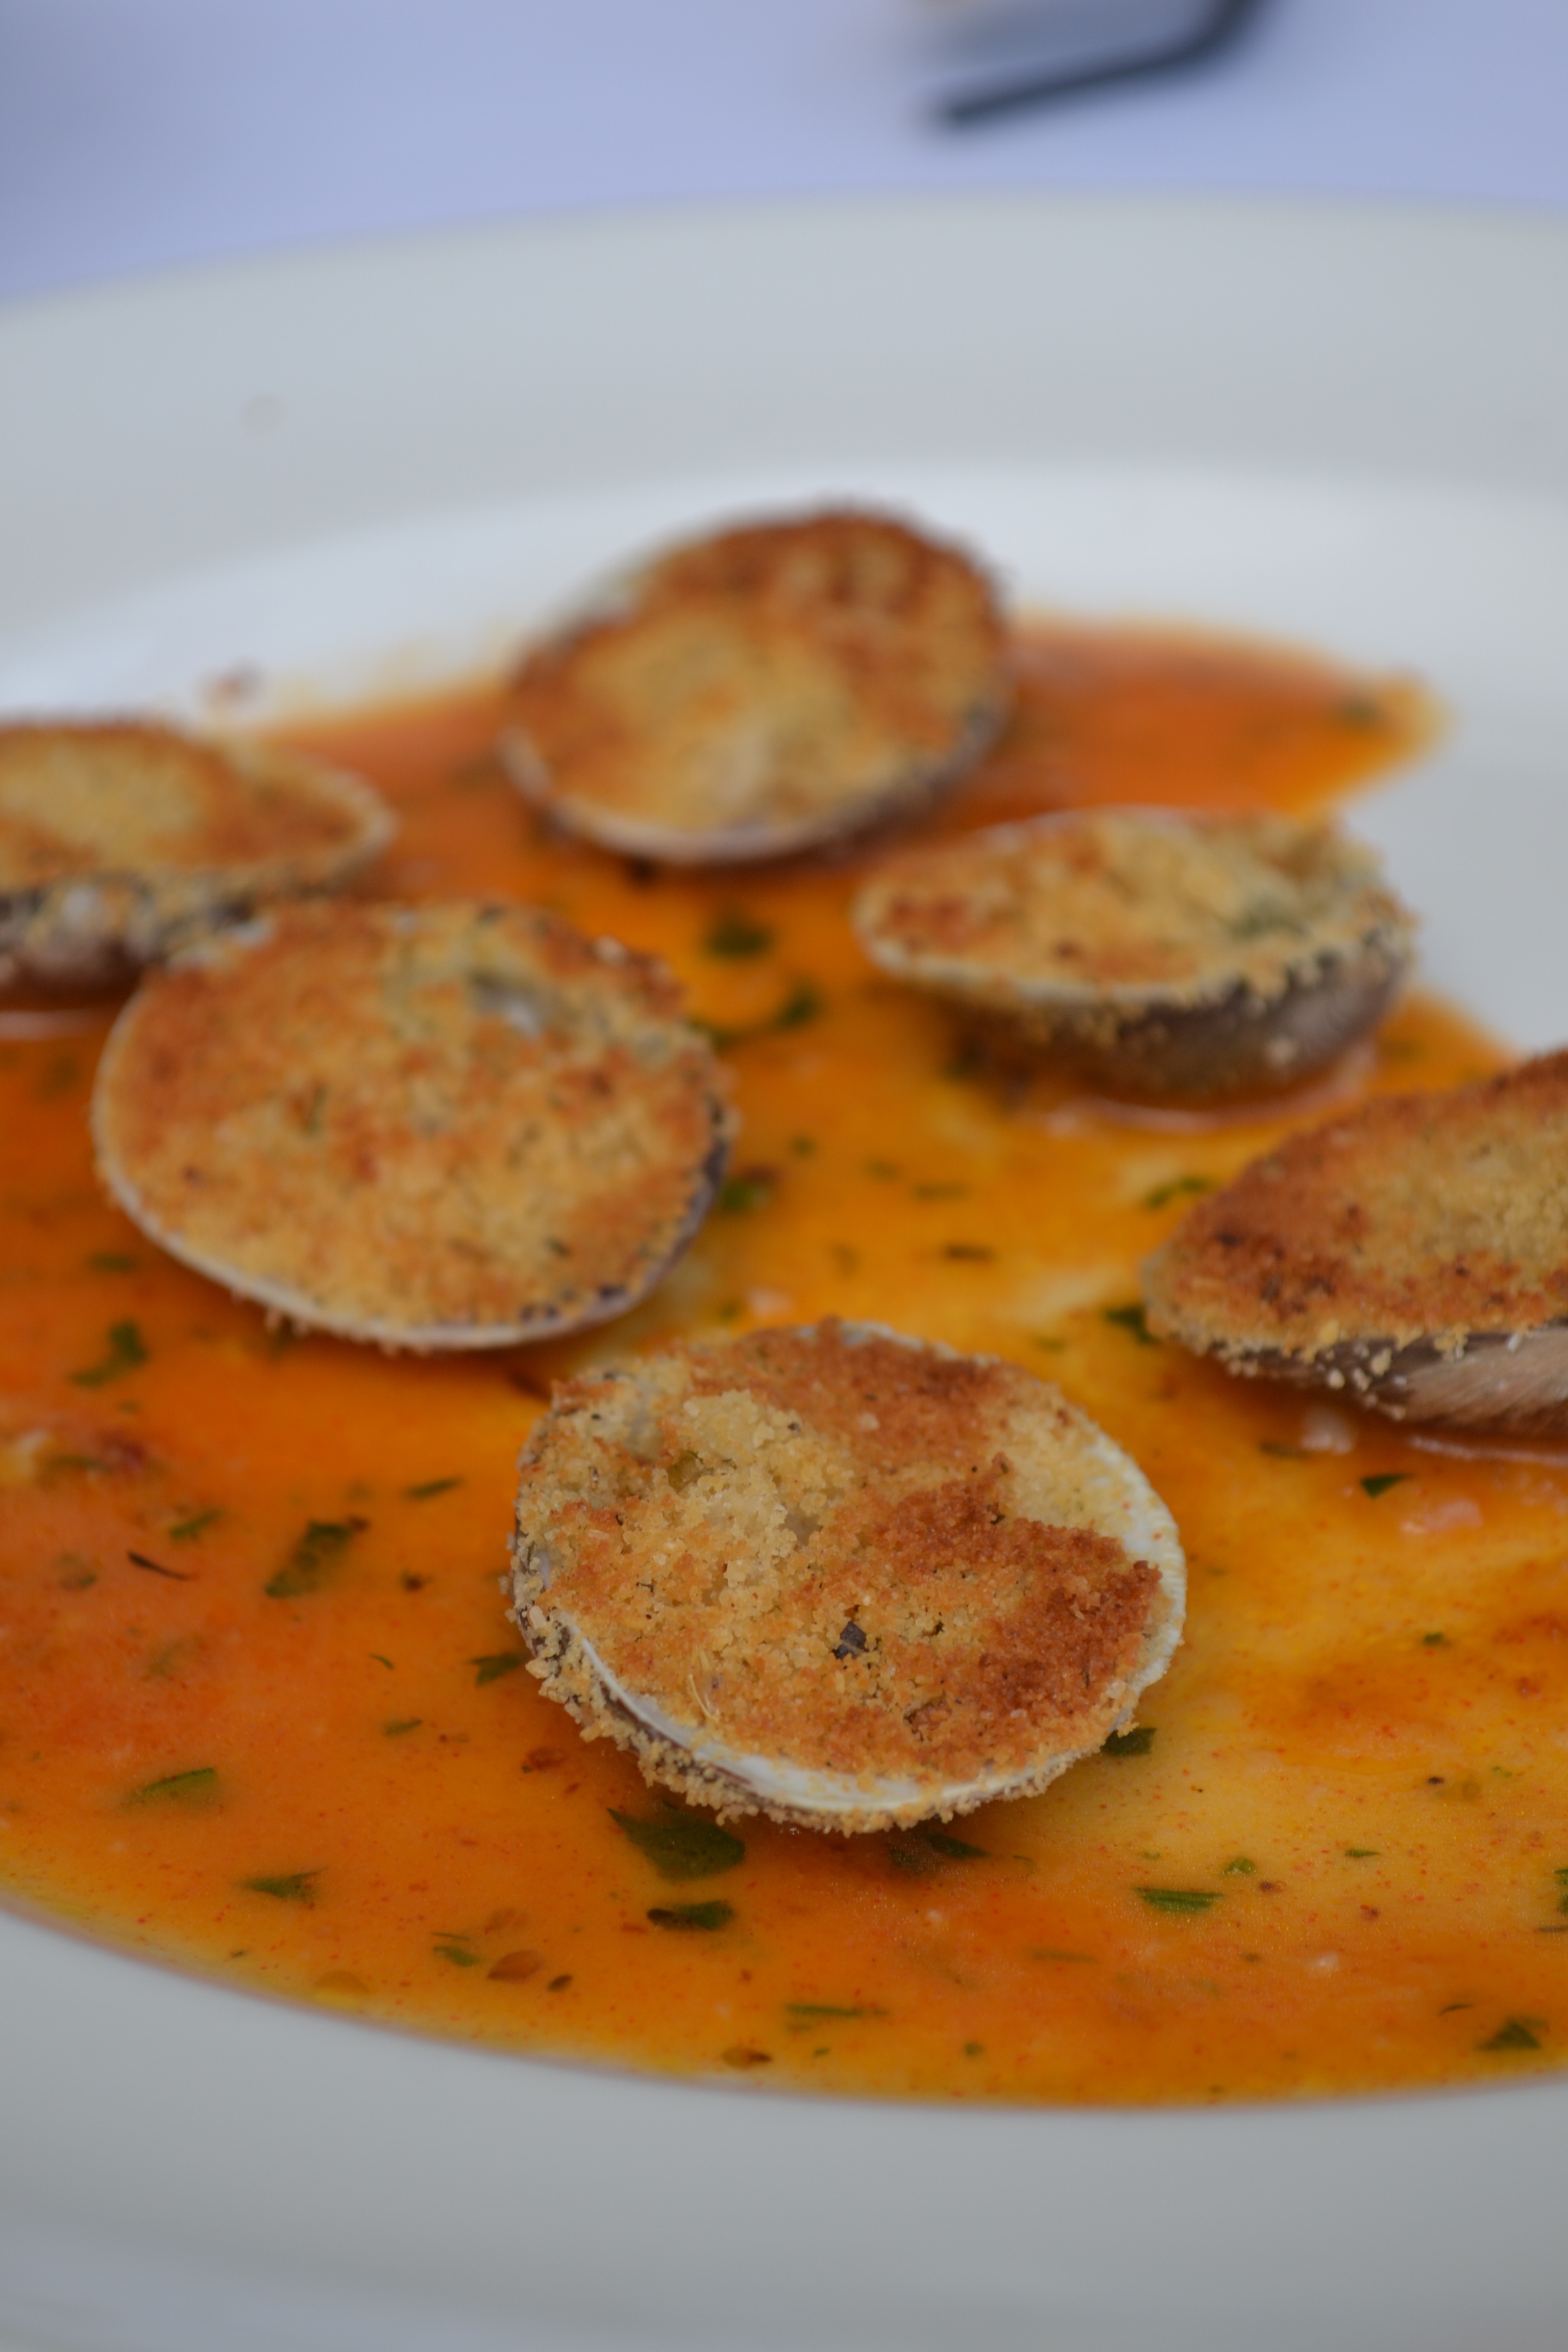 Vongole Oreganata at Il Mulino New York Miami -  Clams on the half shell, baked with bread crumbs, fresh herbs, garlic, white wine, and lemon.